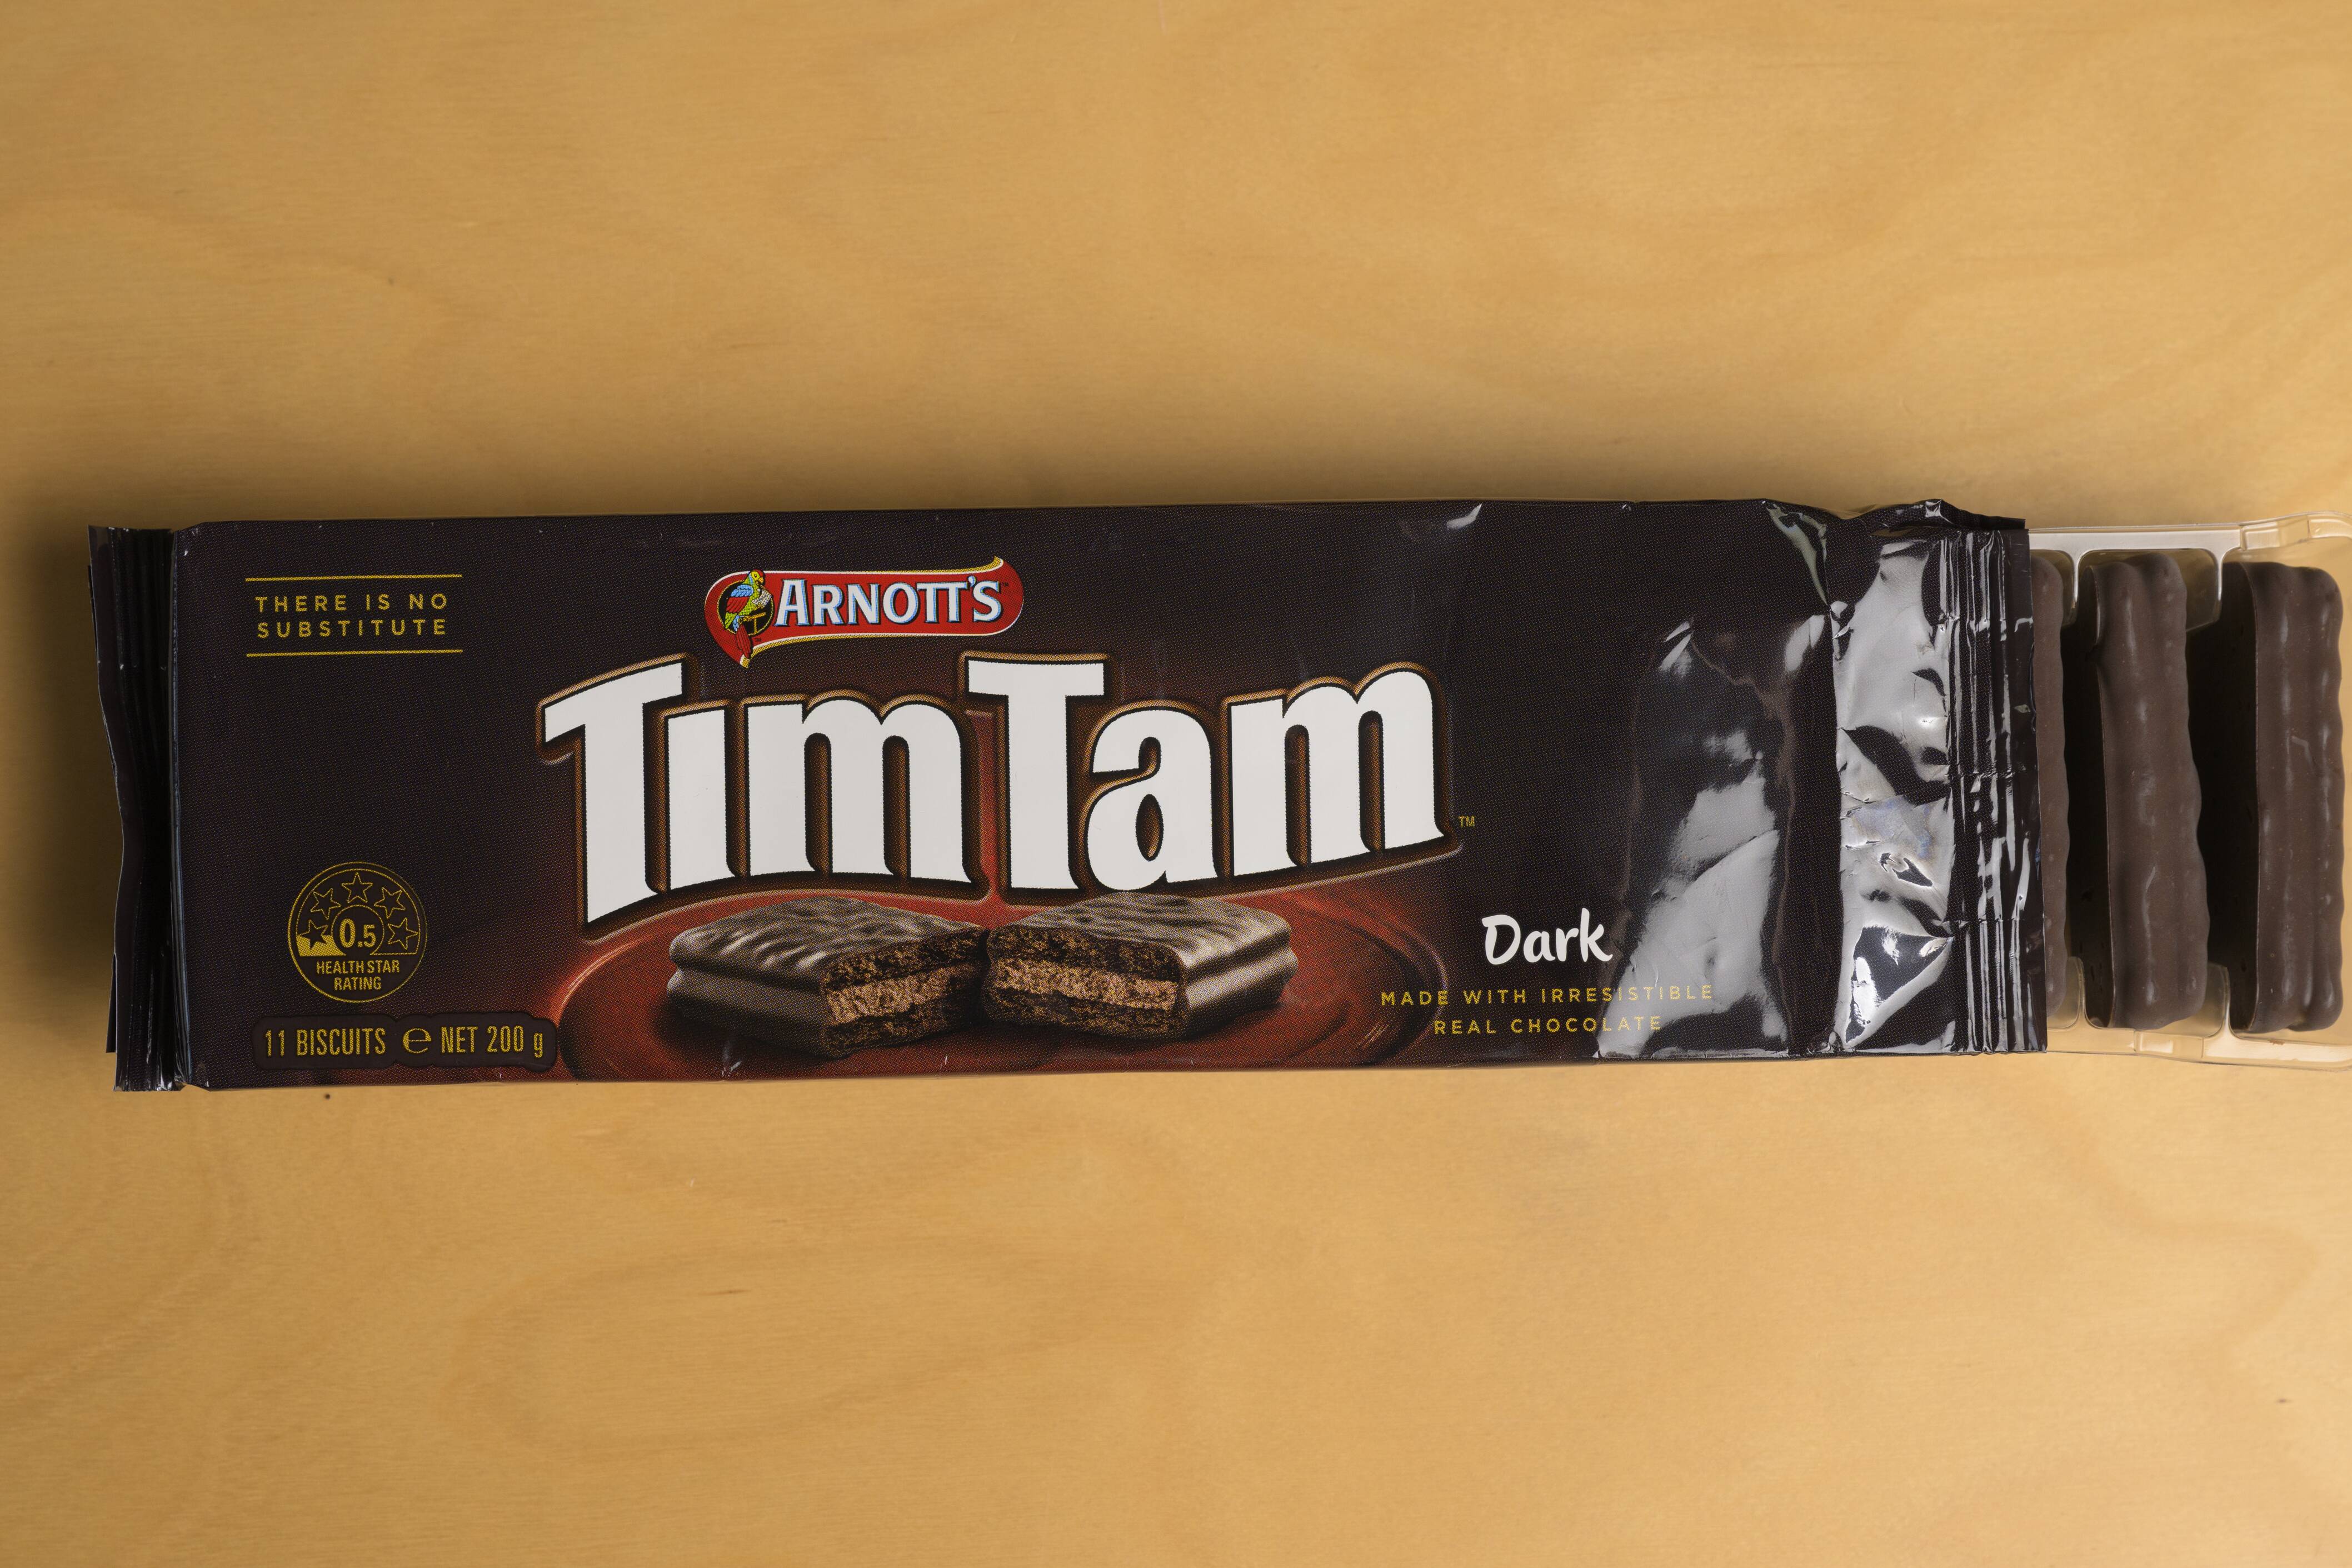 Tim Tam, With The Eras Tour kicking off in Australia on National Tim Tam  Day (and our 60th birthday!), we're celebrating our #TayTam era by givi